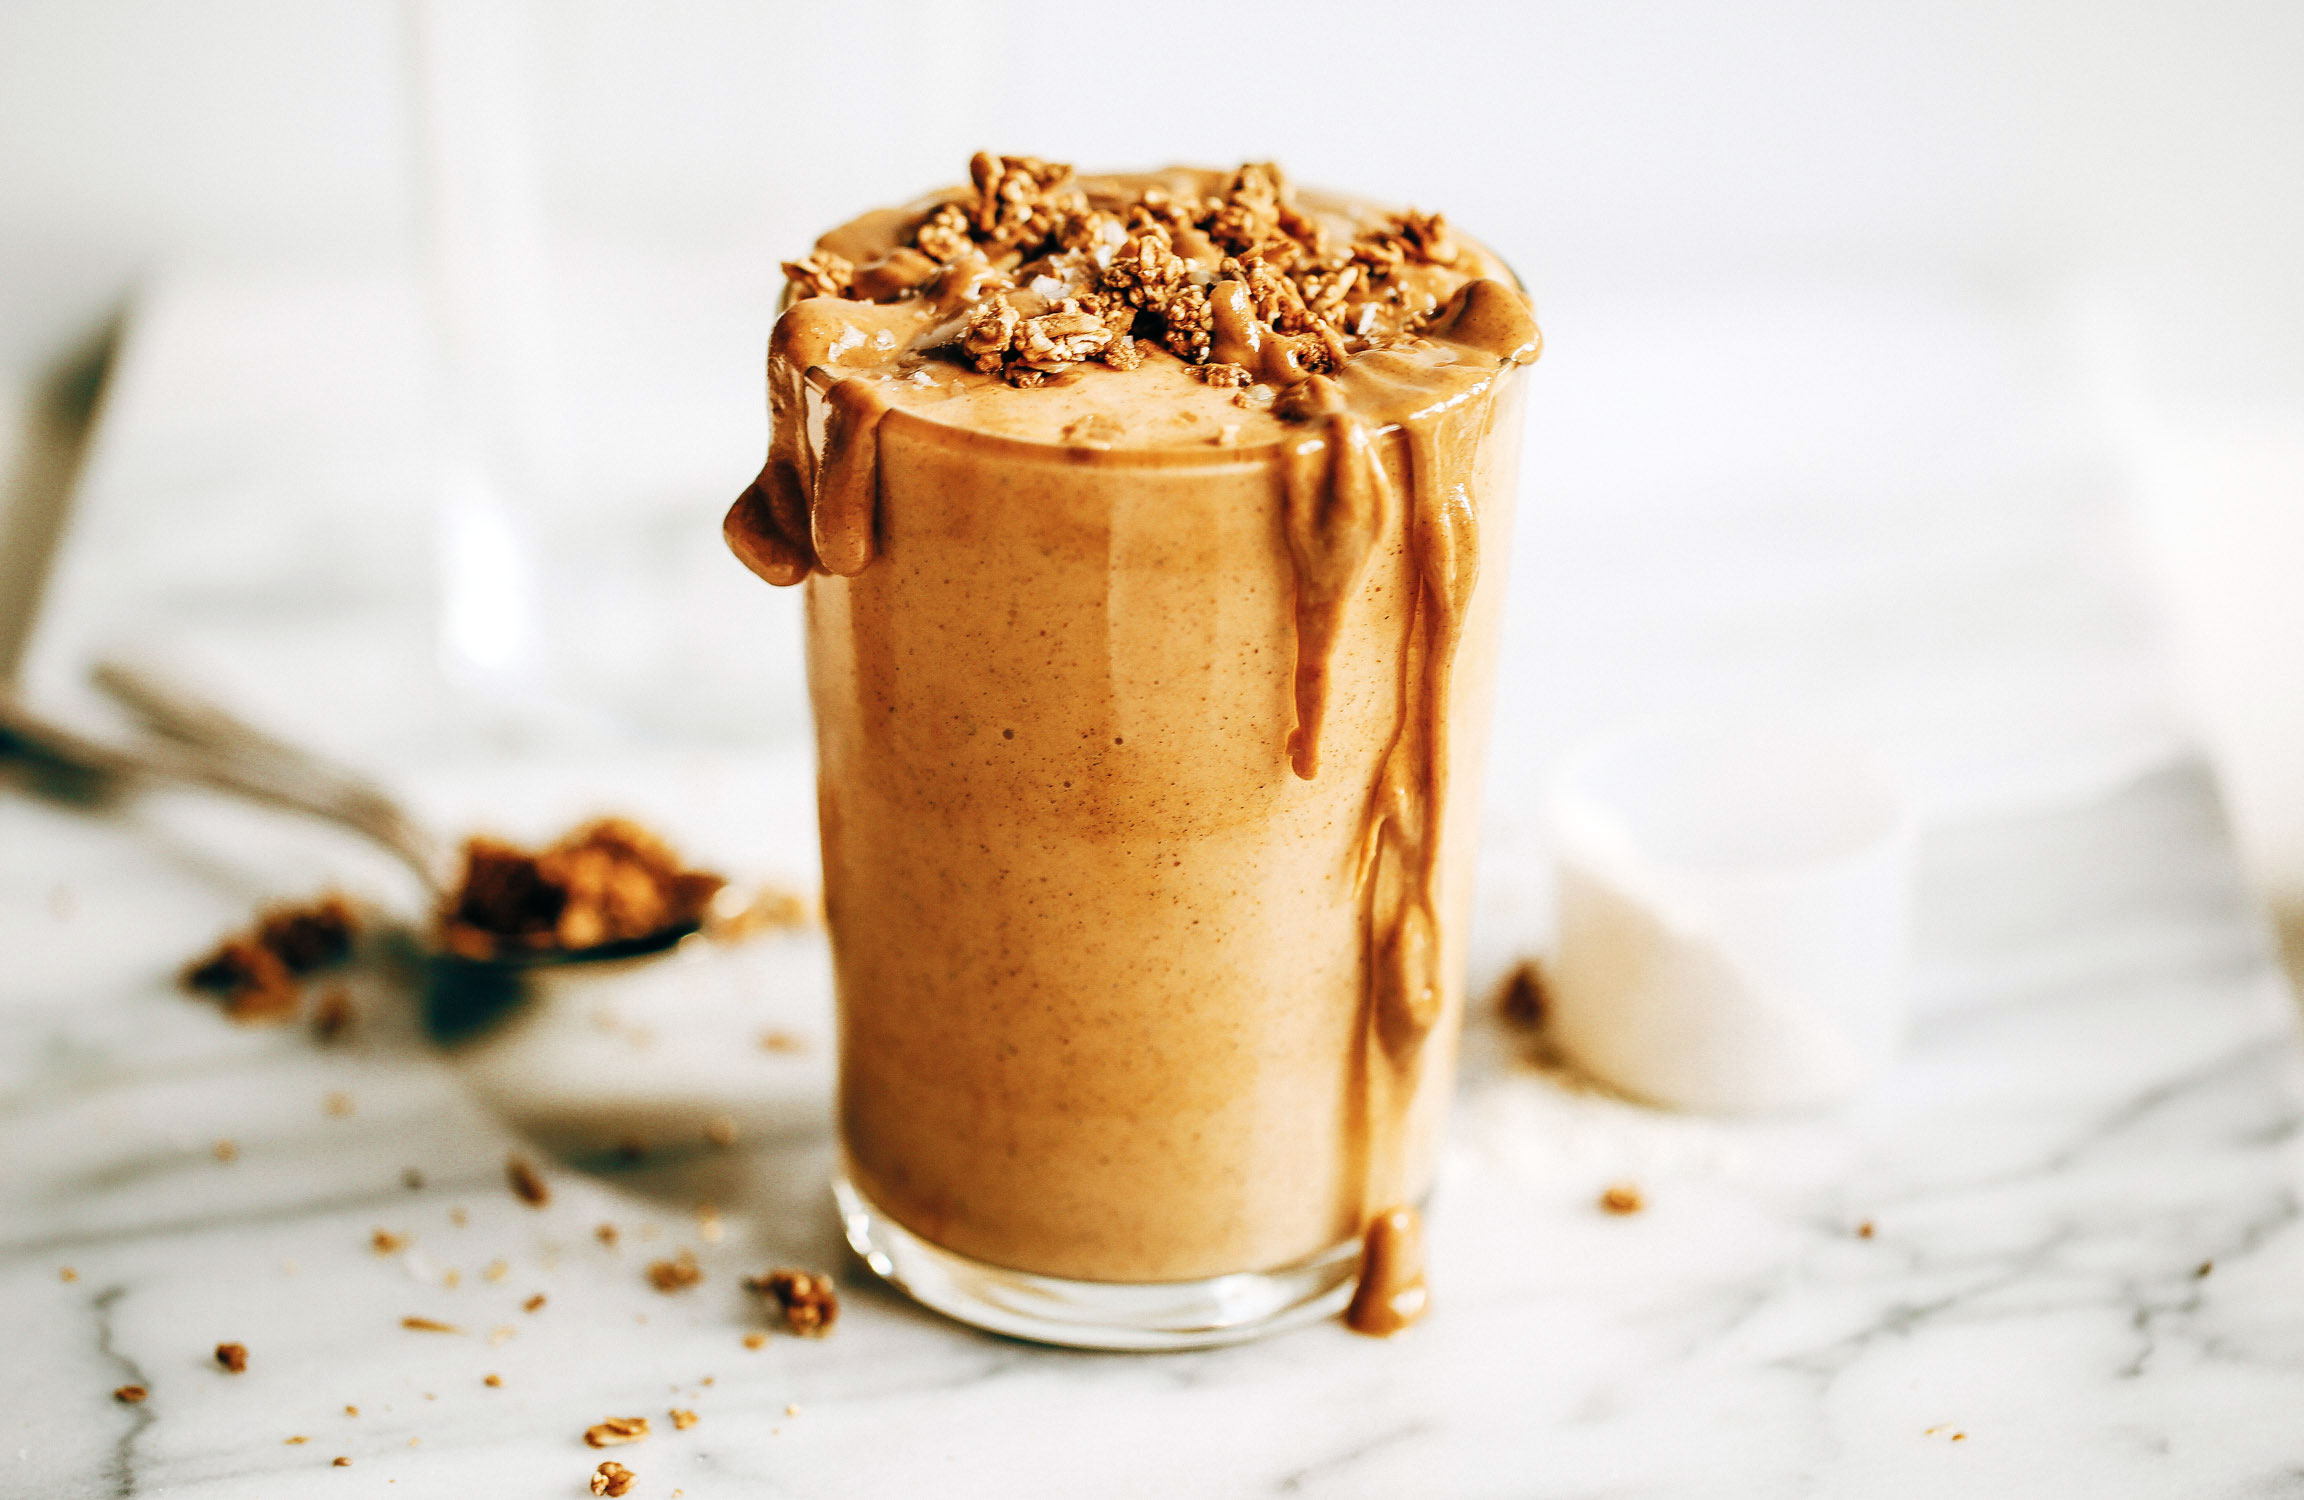 I eat this smoothie EVER. DAY. It’s the best smoothie I have ever had- tastes like pie! Made with sweet potato, cauliflower, zucchini, nut butter, and collagen. You won’t believe how good it taste- also it’s THICK and creamy like ice-cream. Yum yum yum. Sometimes I make this for lunch and dinner too… So, you should make it.